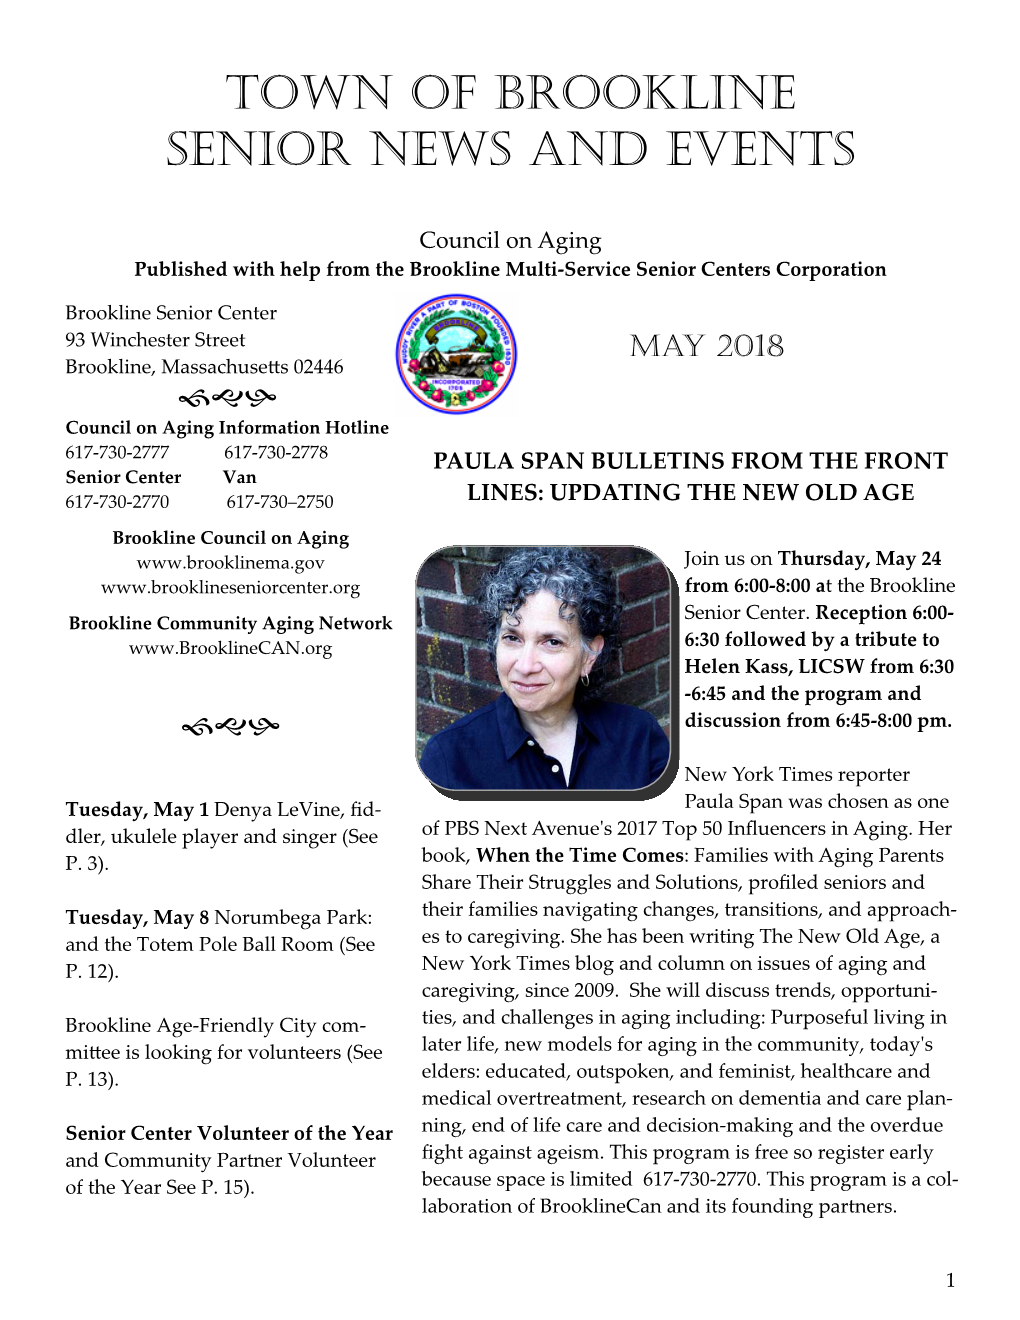 Council on Aging Newsletter MAY 2018